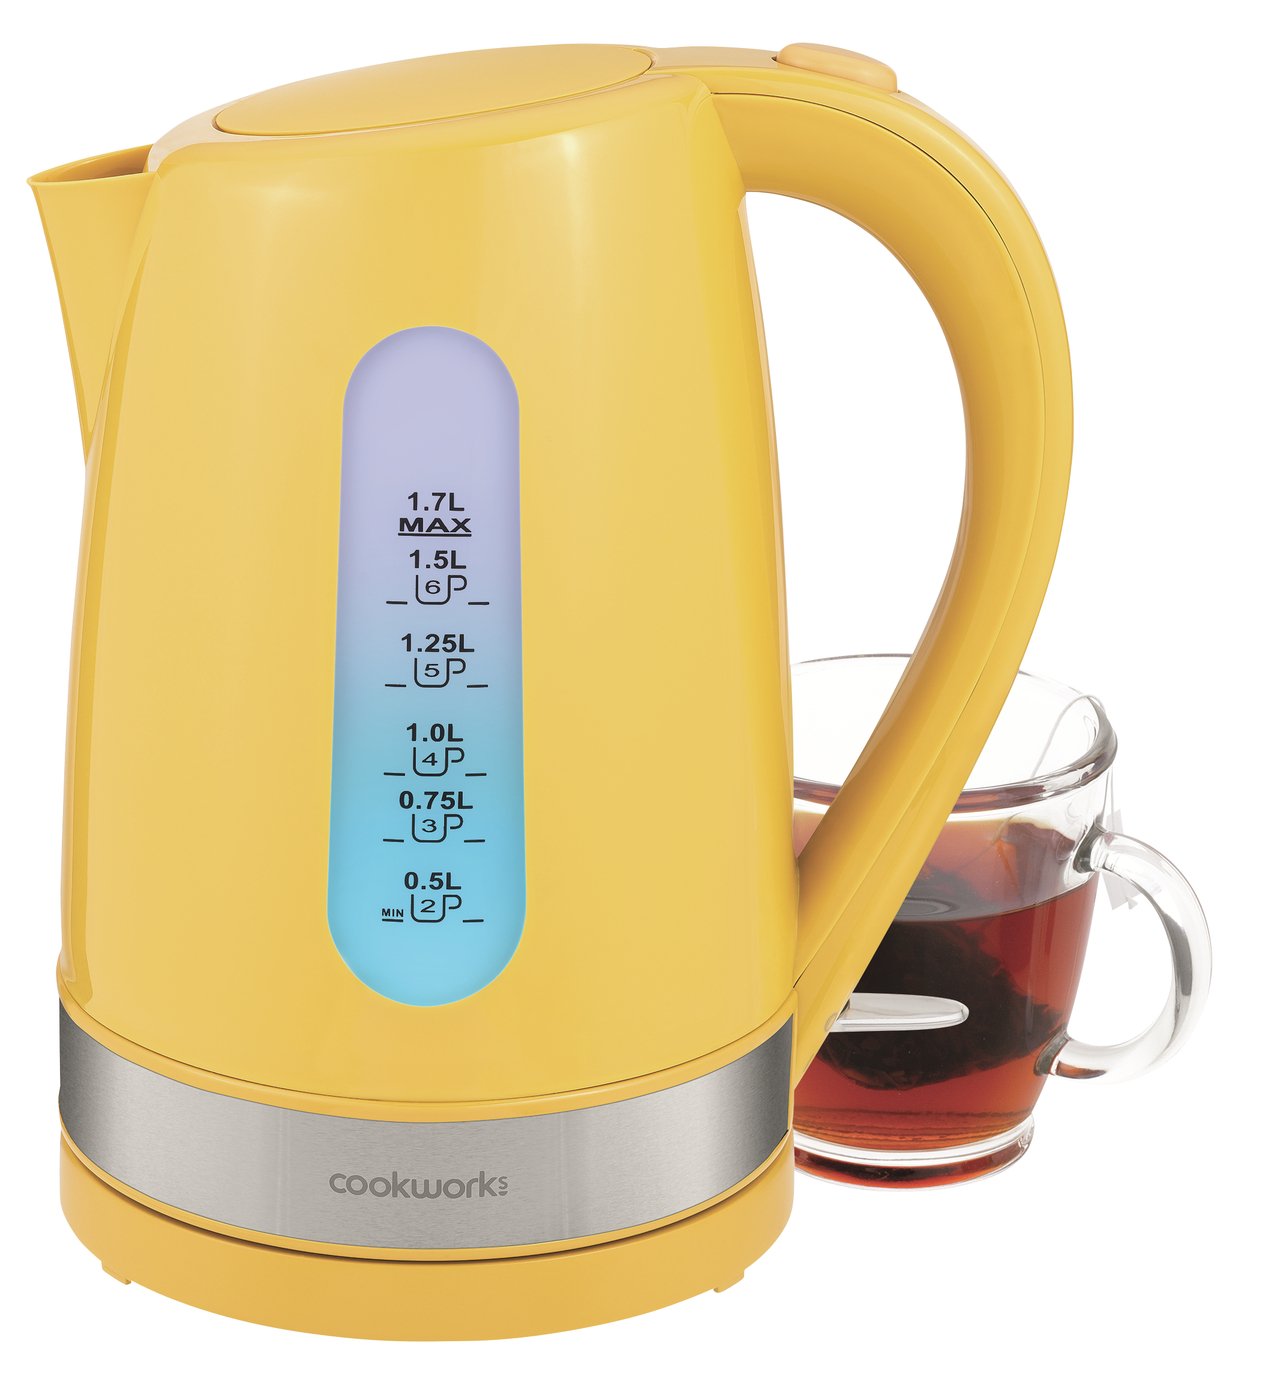 Cookworks Illuminated Kettle Review